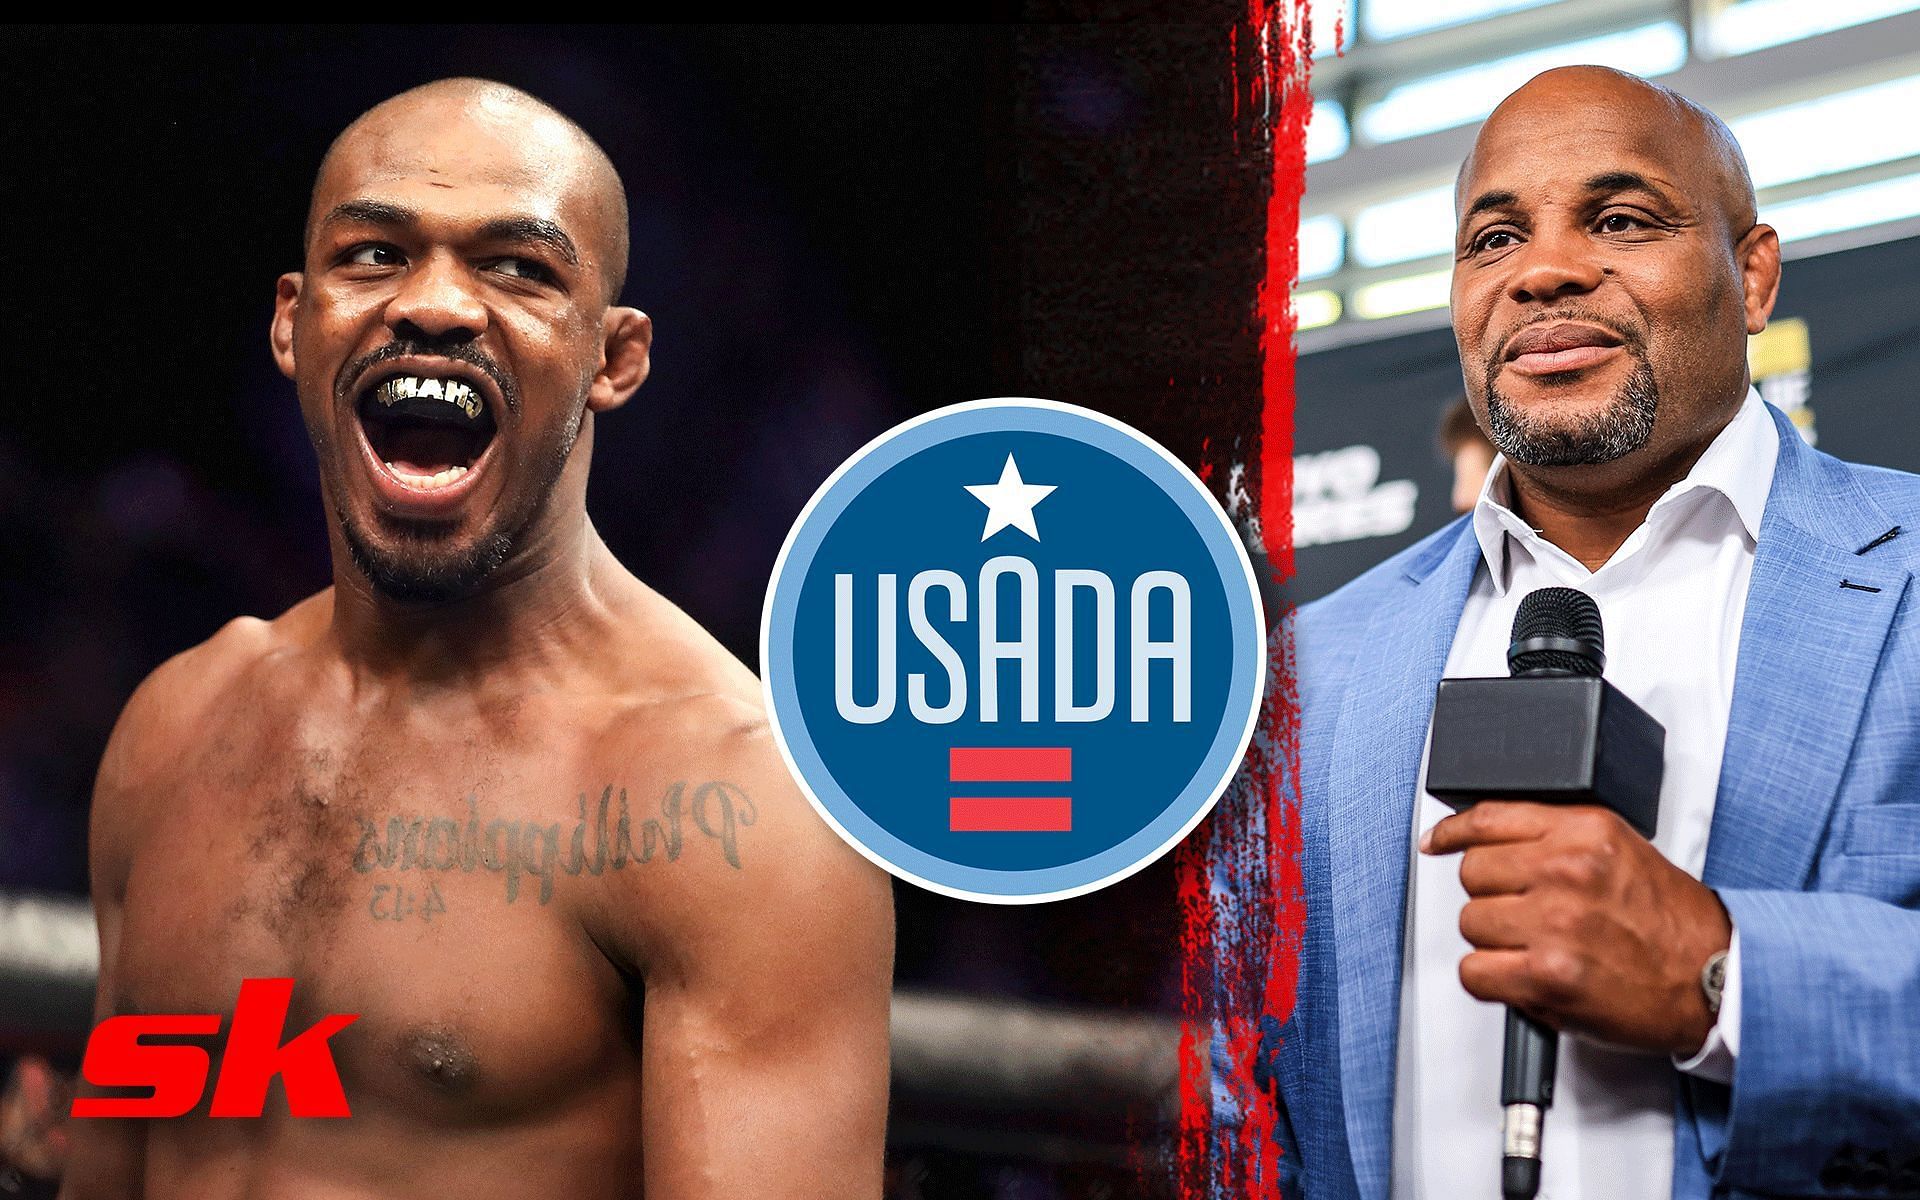 Jon Jones (left) USADA logo (centre) and Daniel Cormier (right) [Image Courtesy: Getty Images and @usantidoping on Instagram]